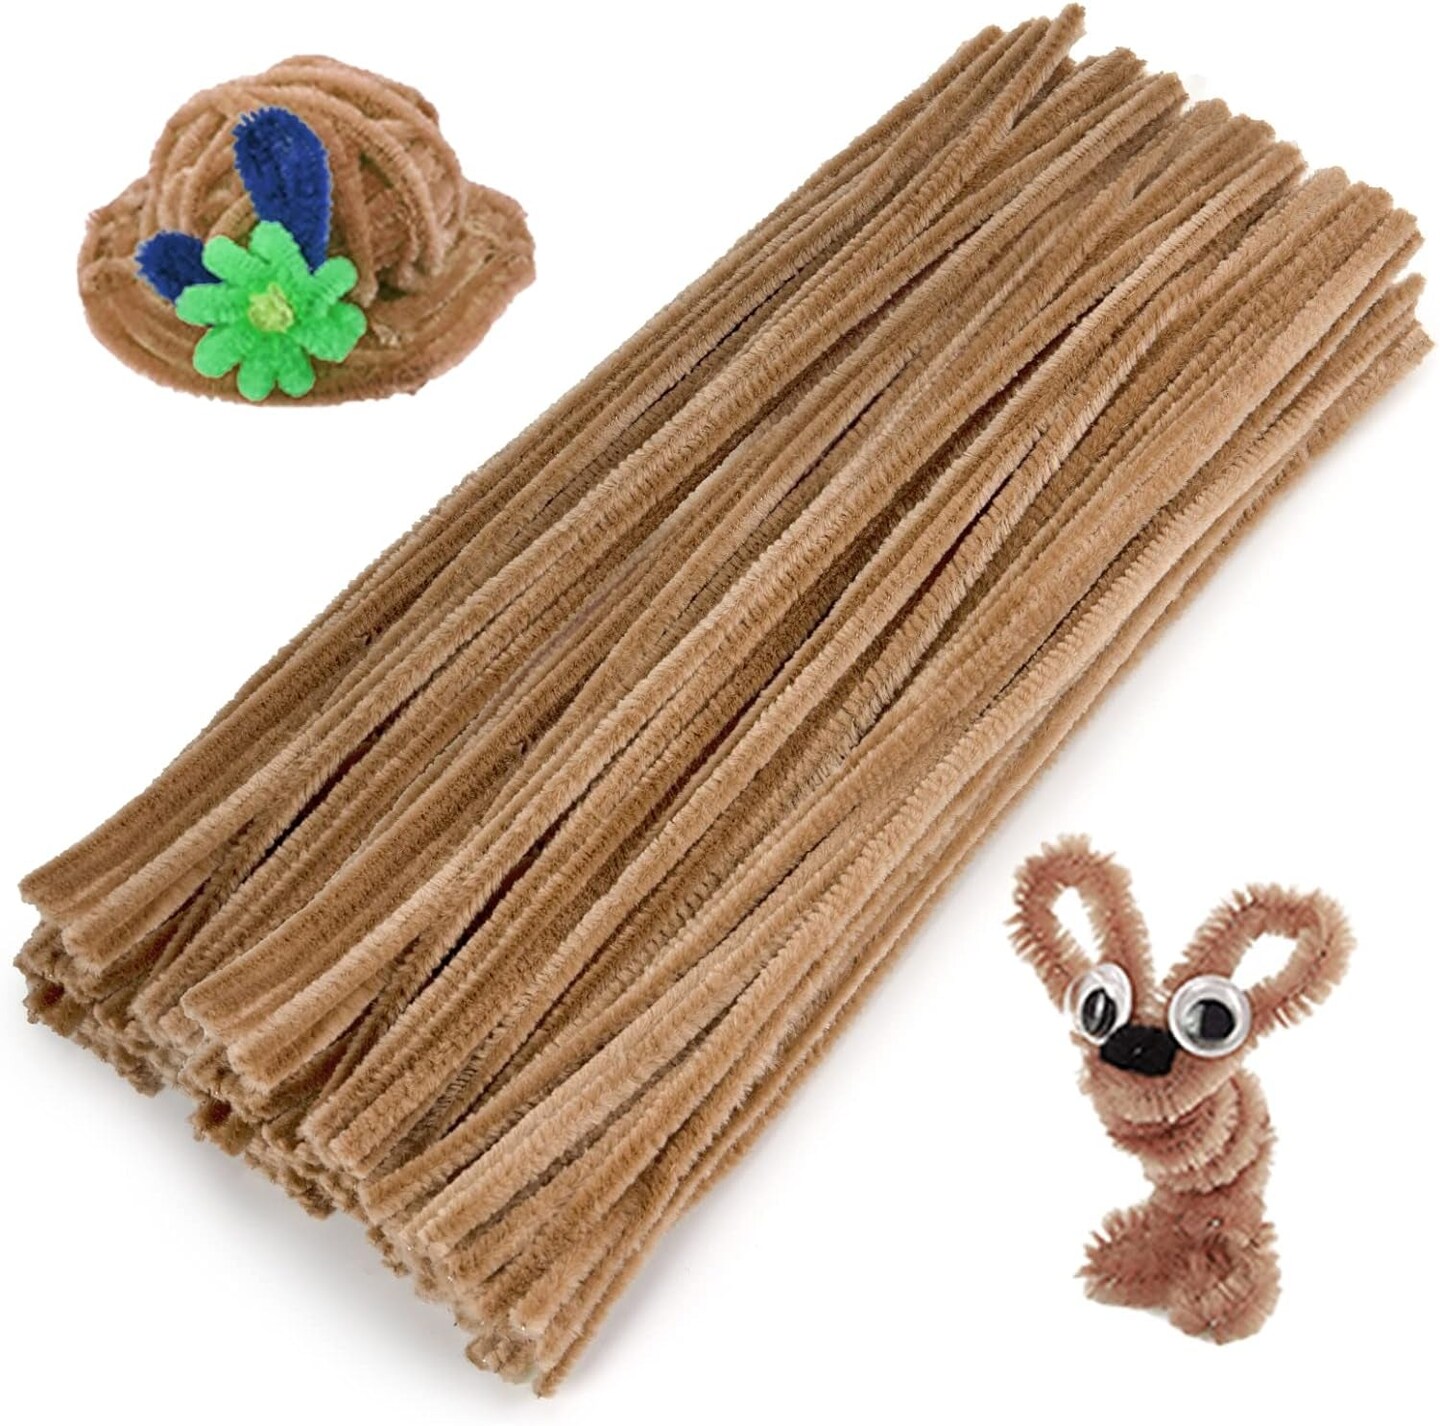 100 Pieces Pipe Cleaners Chenille Stem, Brown Pipe Cleaners Craft